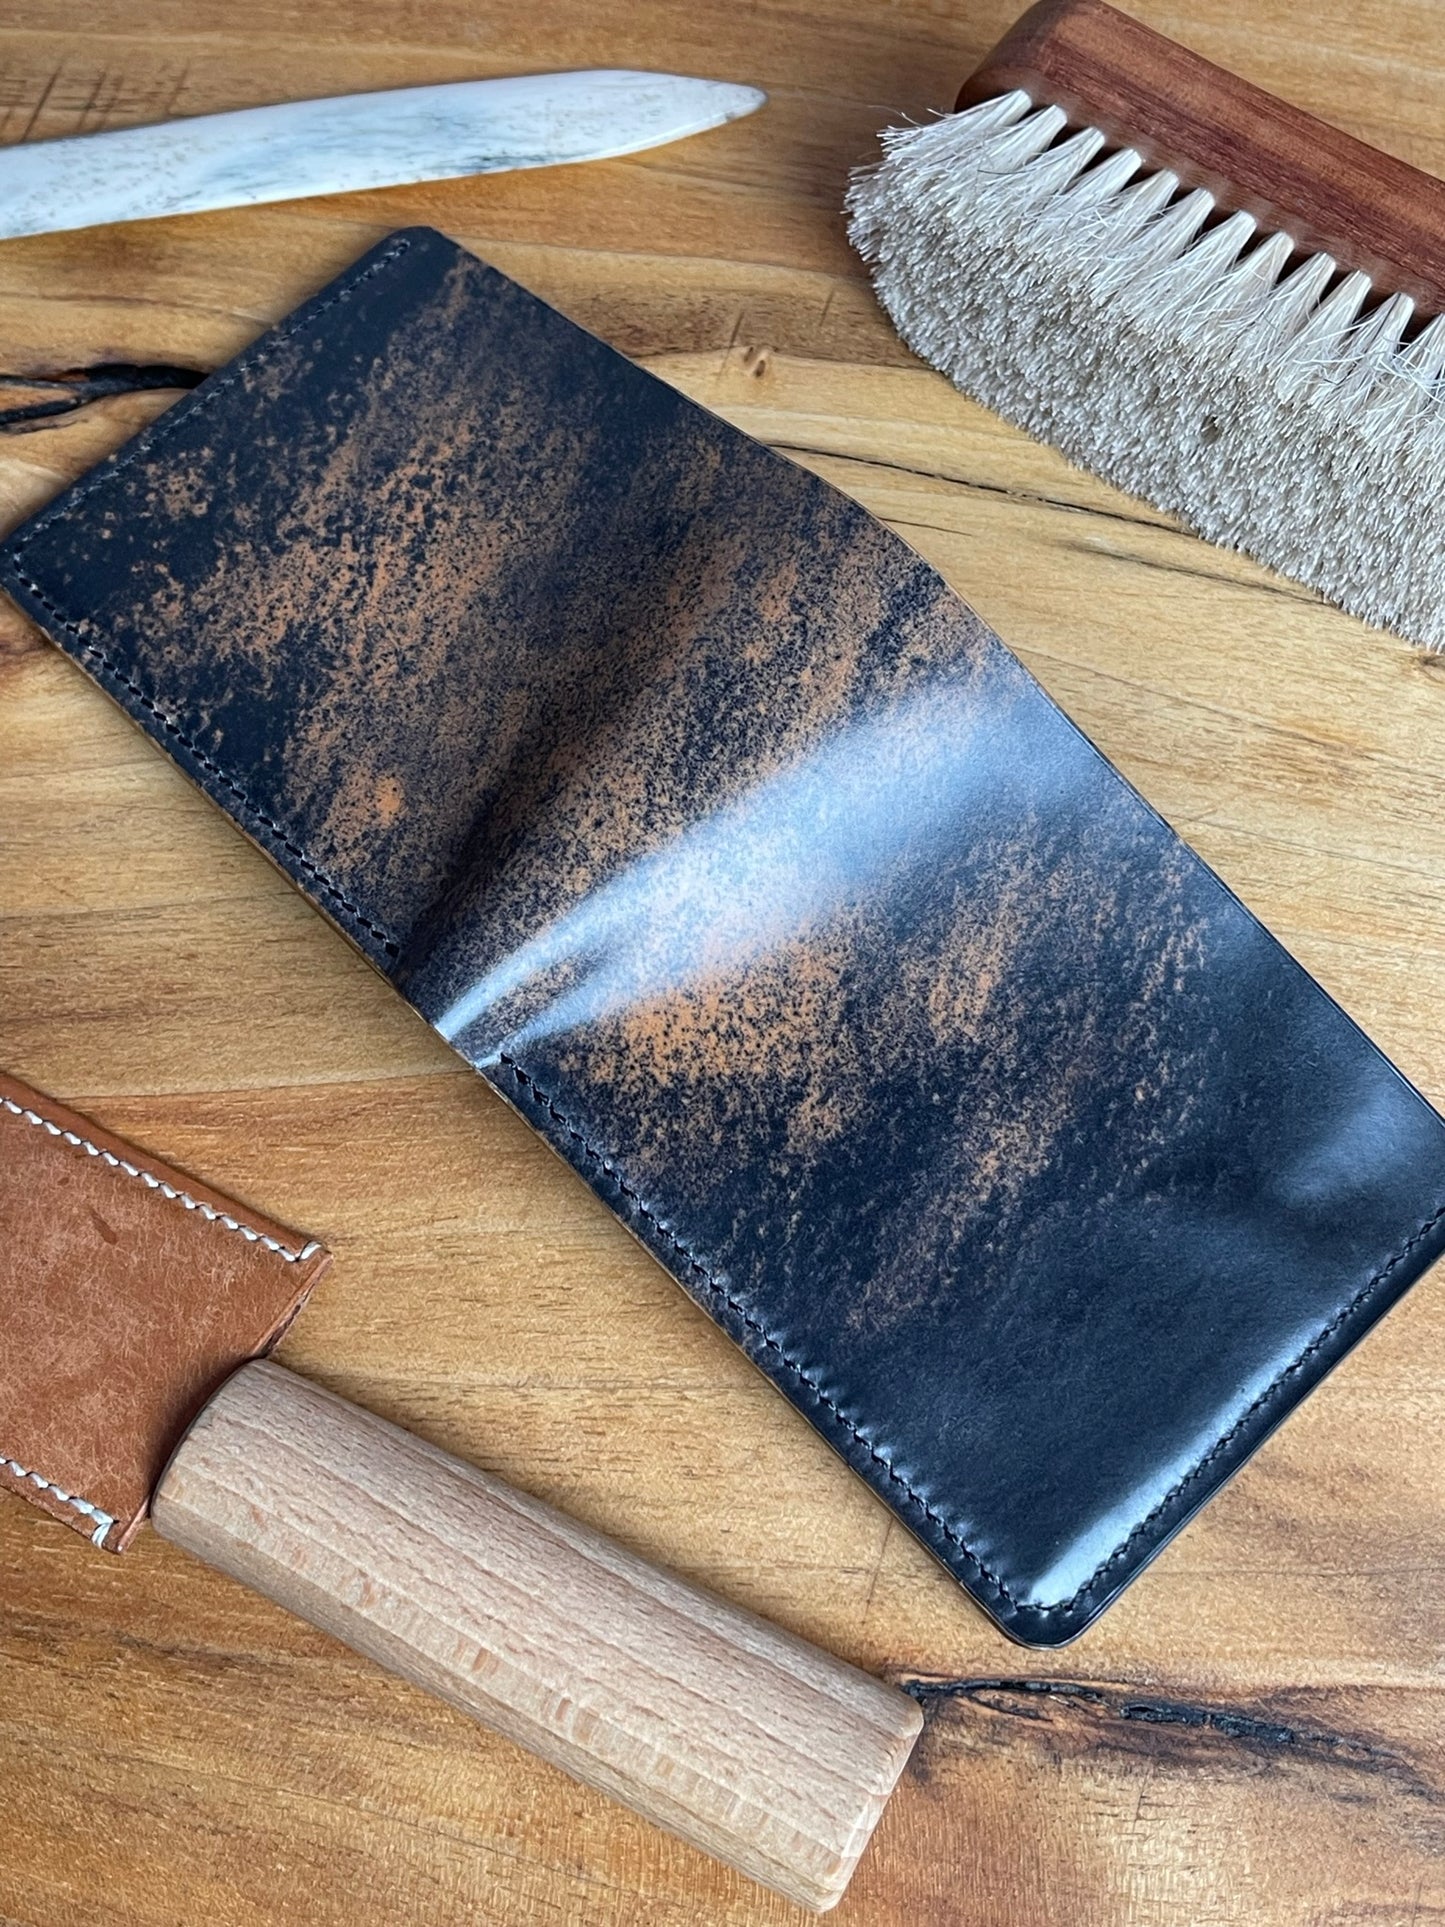 Classic Bifold - Black Marbled Shell Cordovan and Black buttero